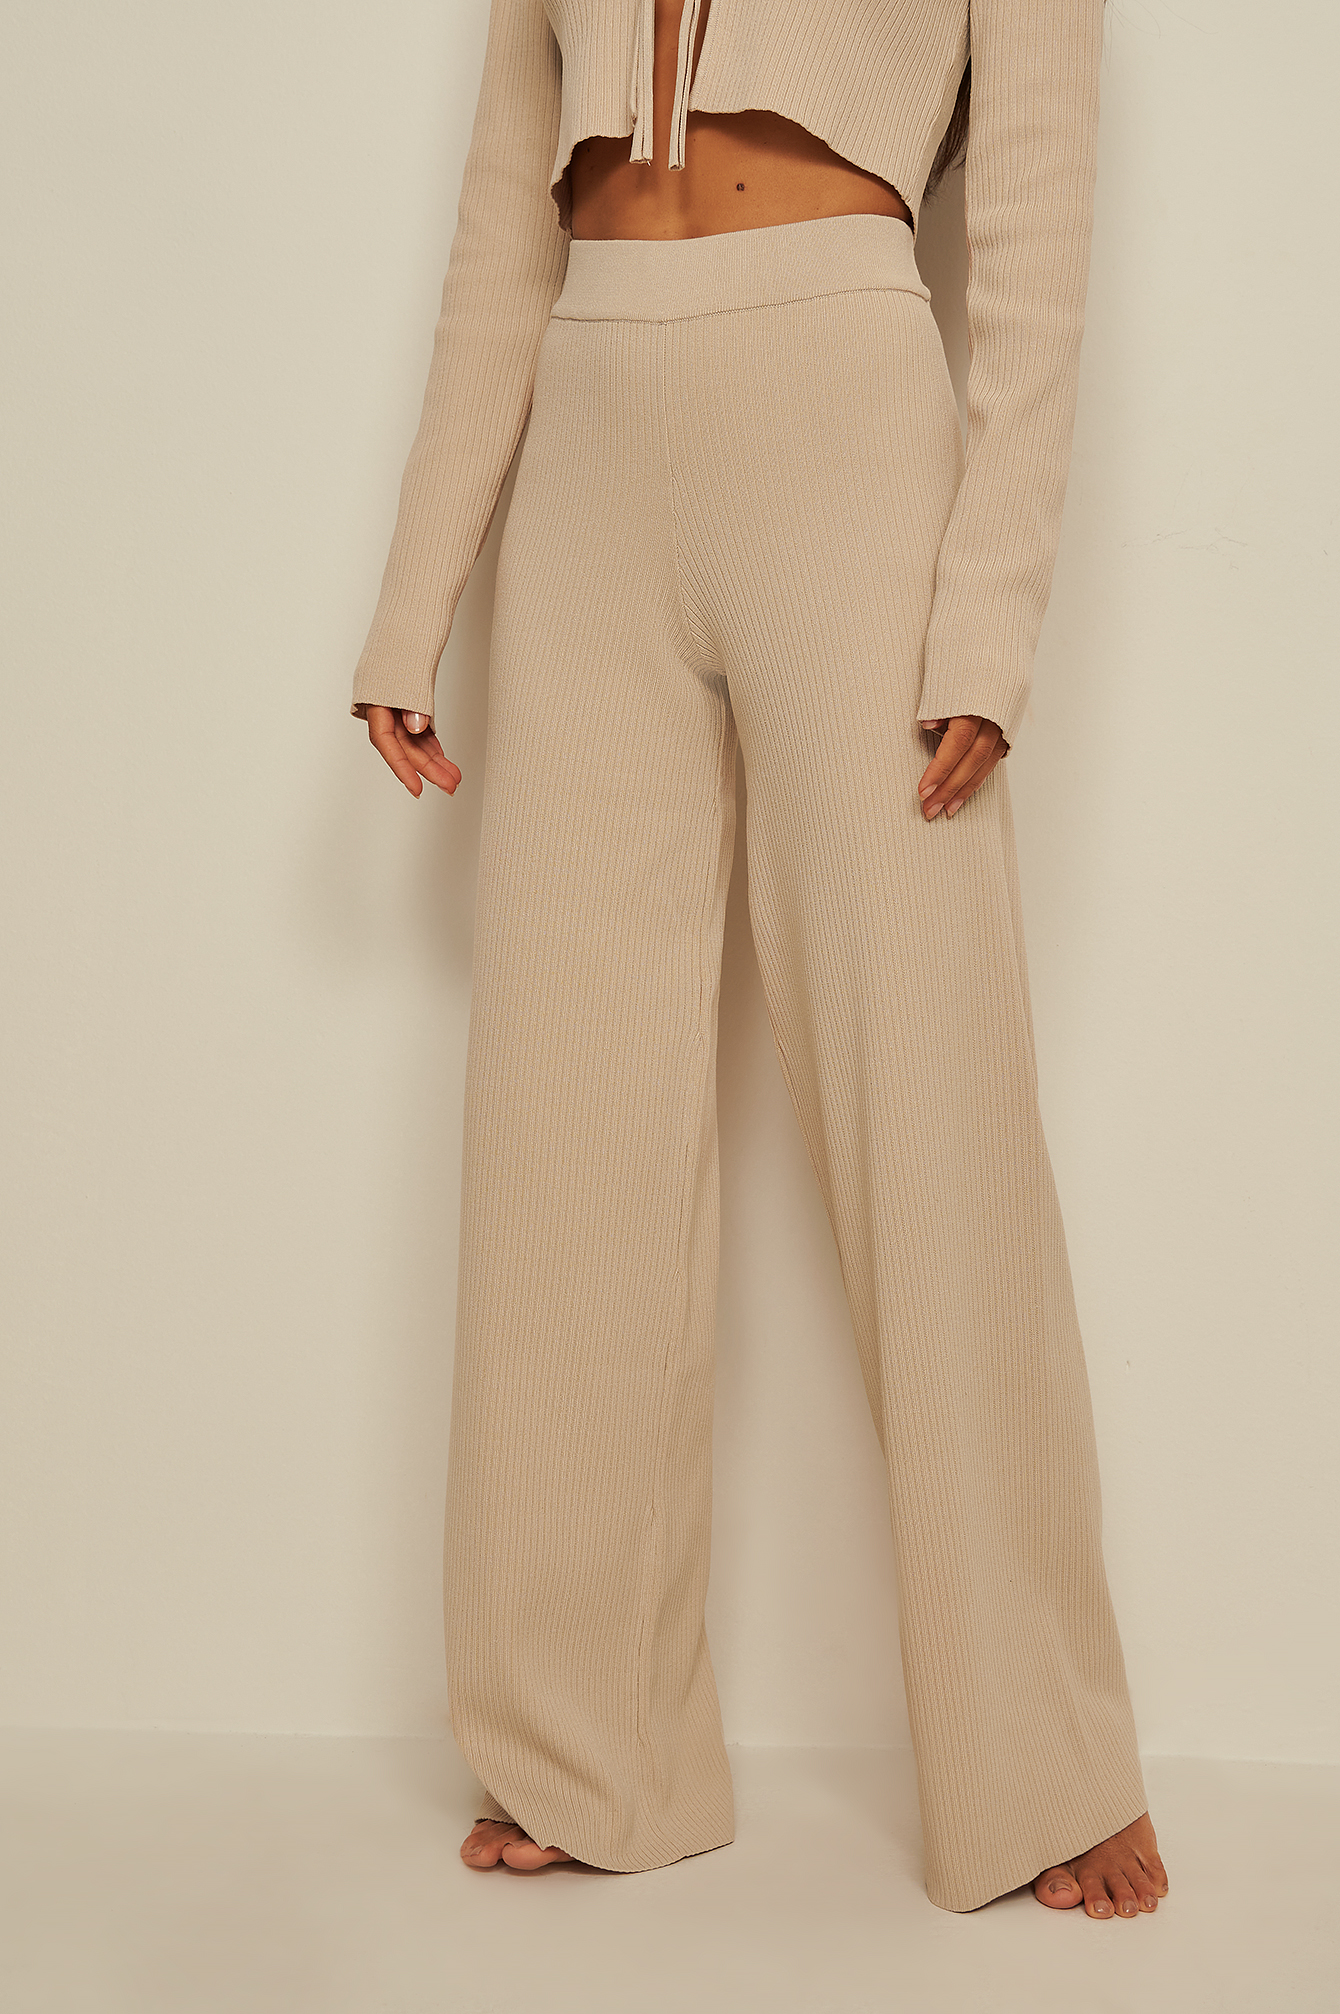 Beige/Brown Knitted Ribbed Pants